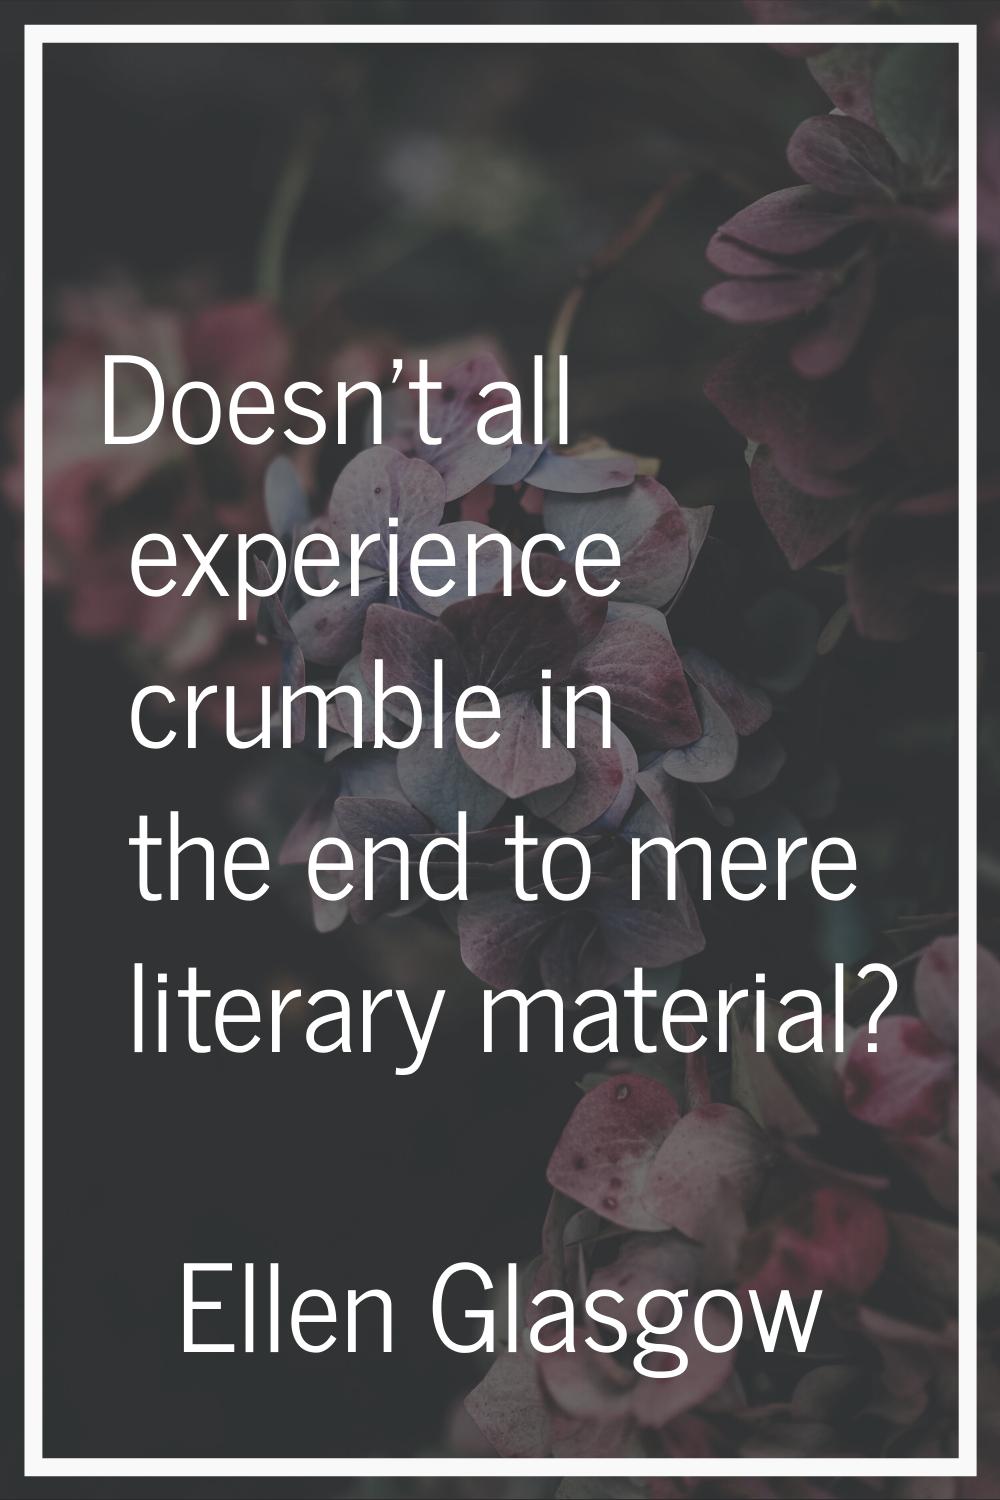 Doesn't all experience crumble in the end to mere literary material?